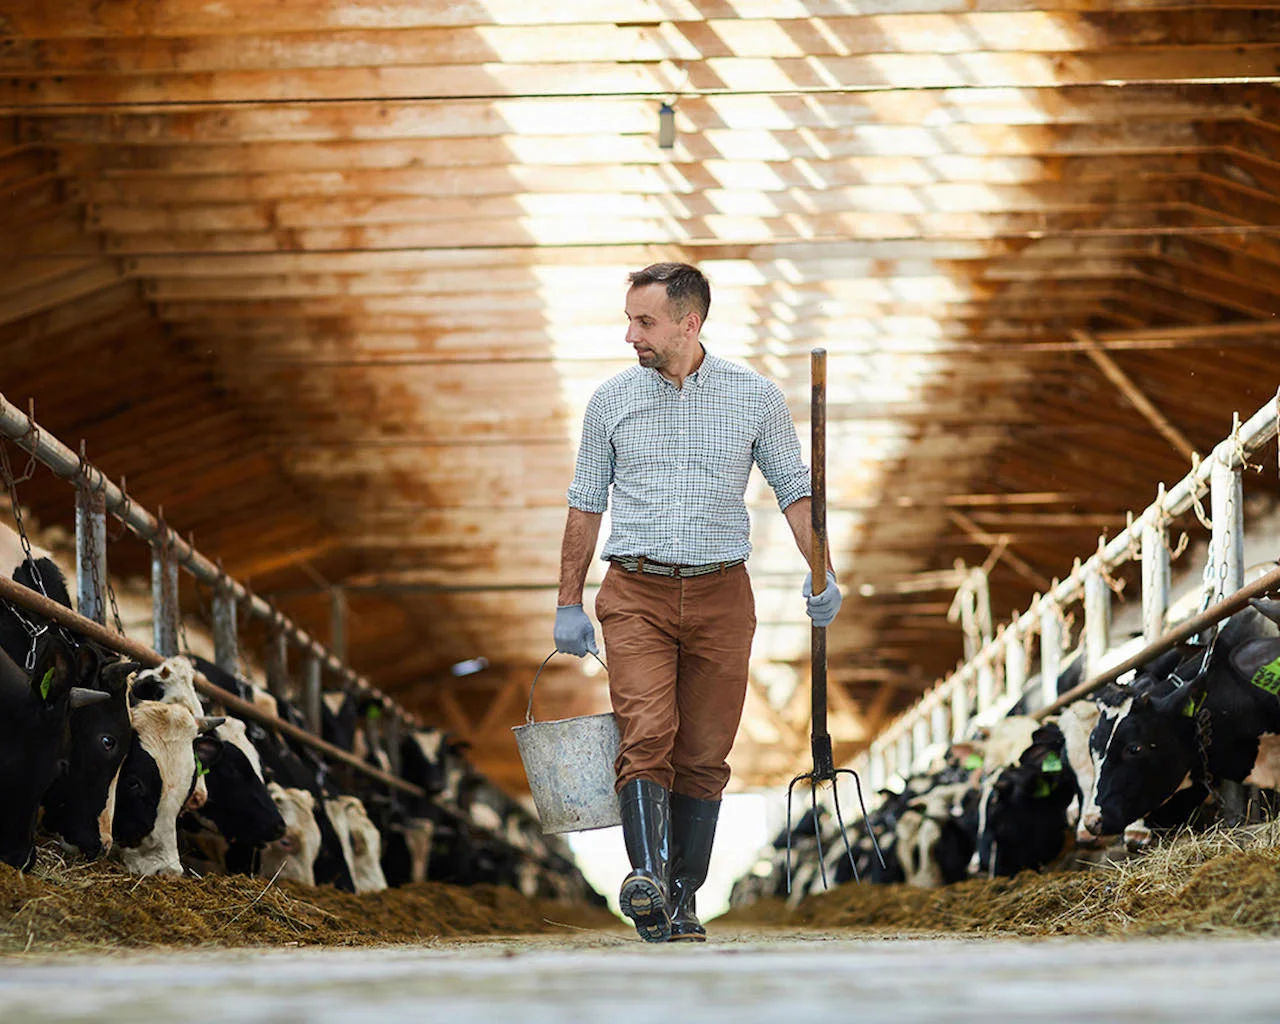 Cattle farmer in barn with cows